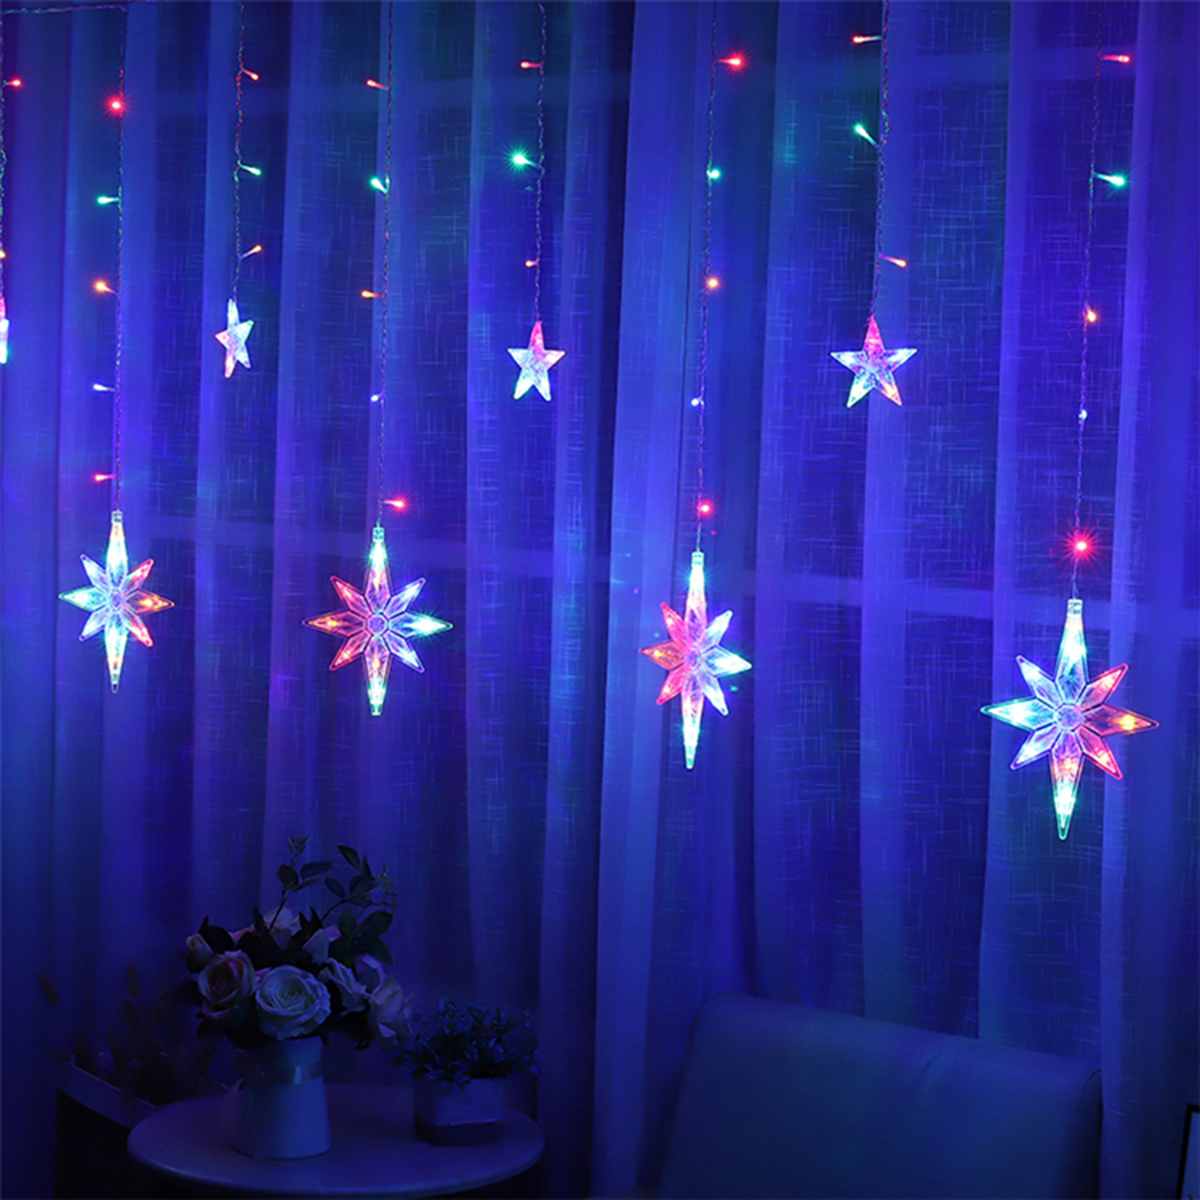 Star-Curtain-Window-String-Light-LED-Fairy-Christmas-Decorations-Lights-Holidays-Party-Wedding-Outdo-1781168-8